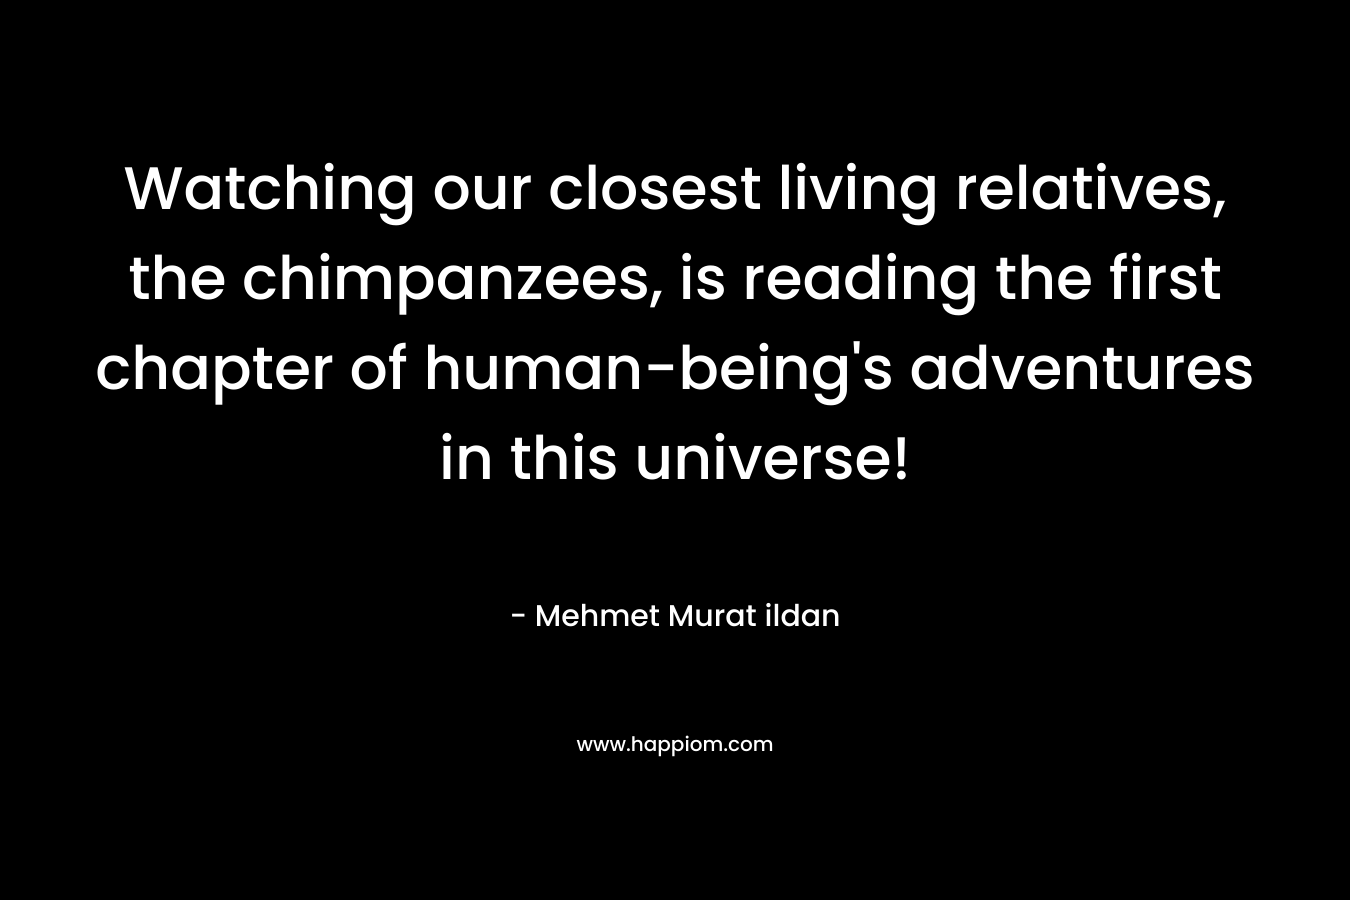 Watching our closest living relatives, the chimpanzees, is reading the first chapter of human-being’s adventures in this universe! – Mehmet Murat ildan